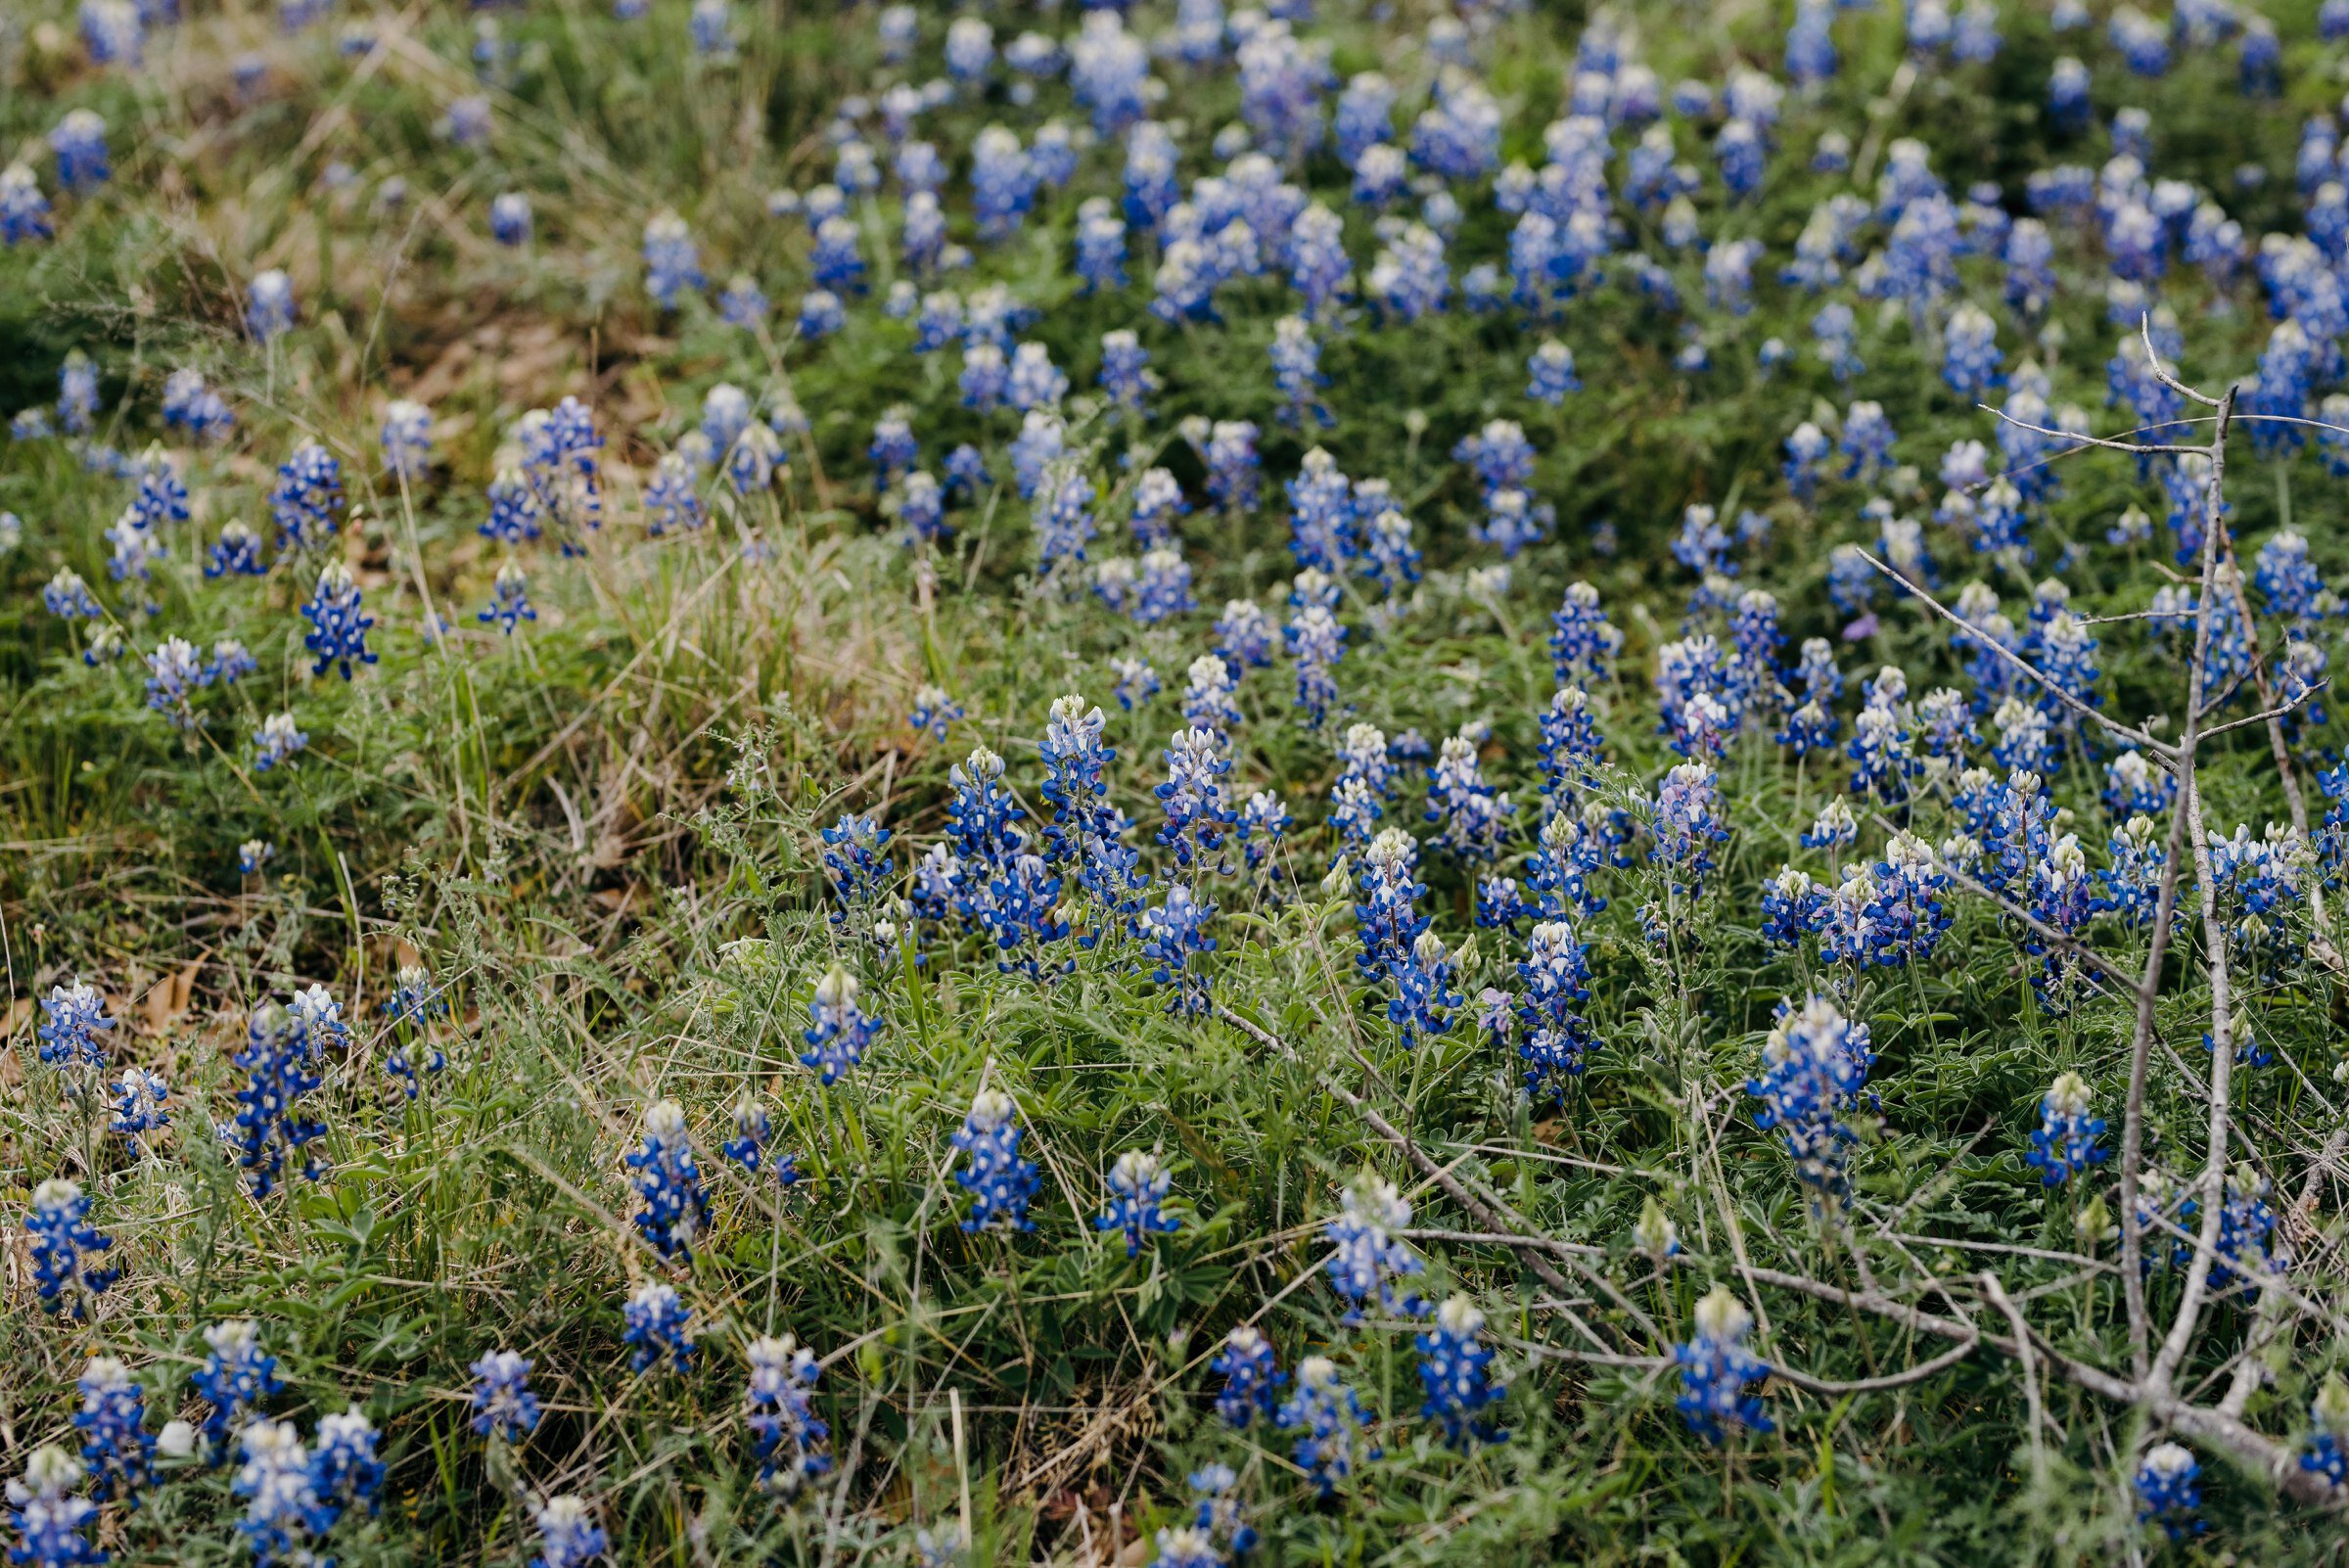  field of bluebonnets at the plant at kyle austin texas 